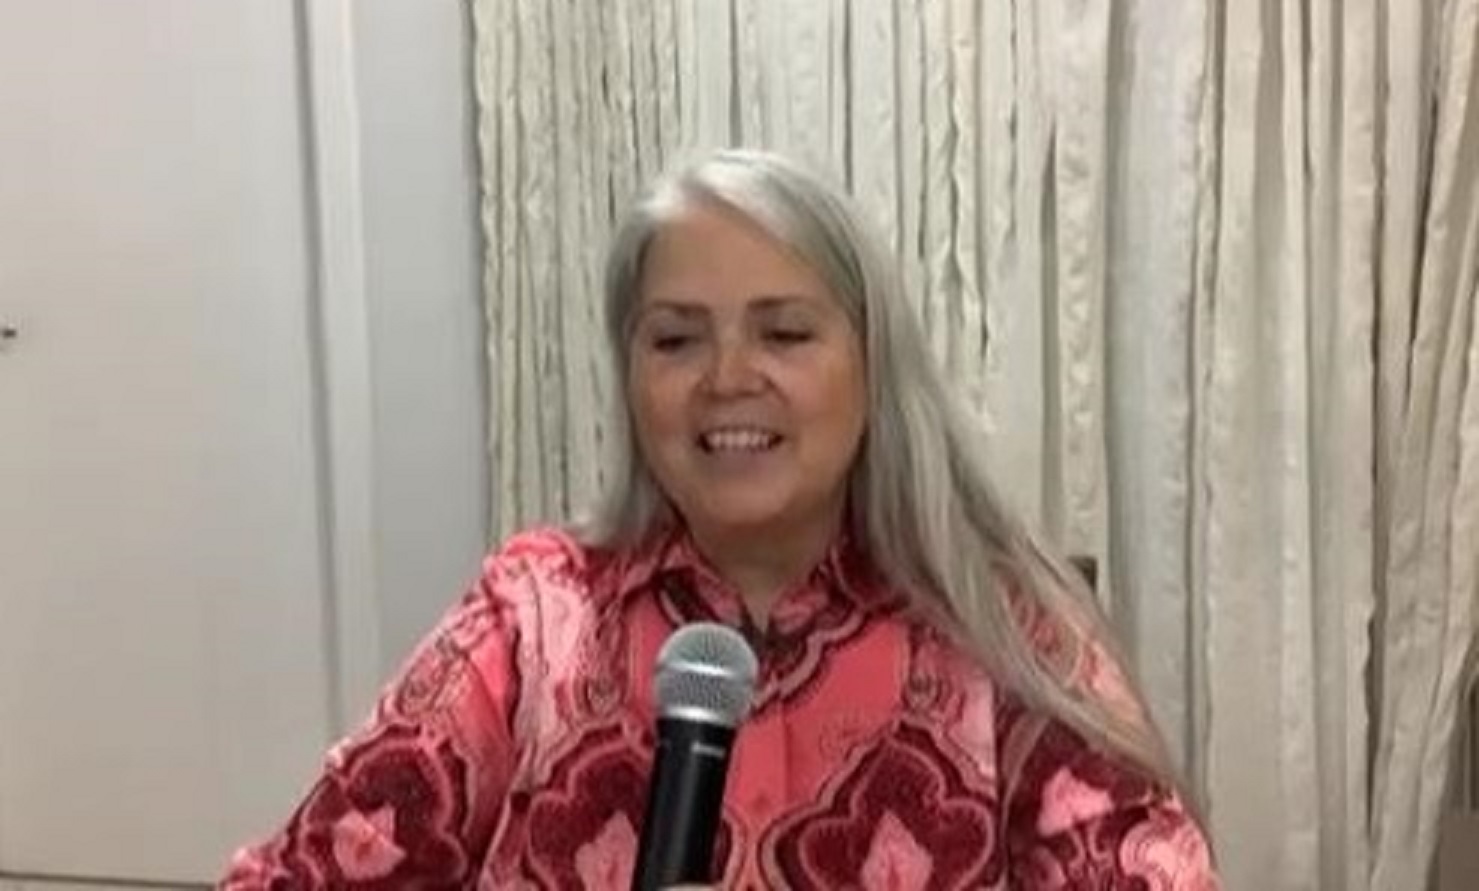 April 2020 World Conference of the Zion Project in Brazil, Sister Whitefield speech